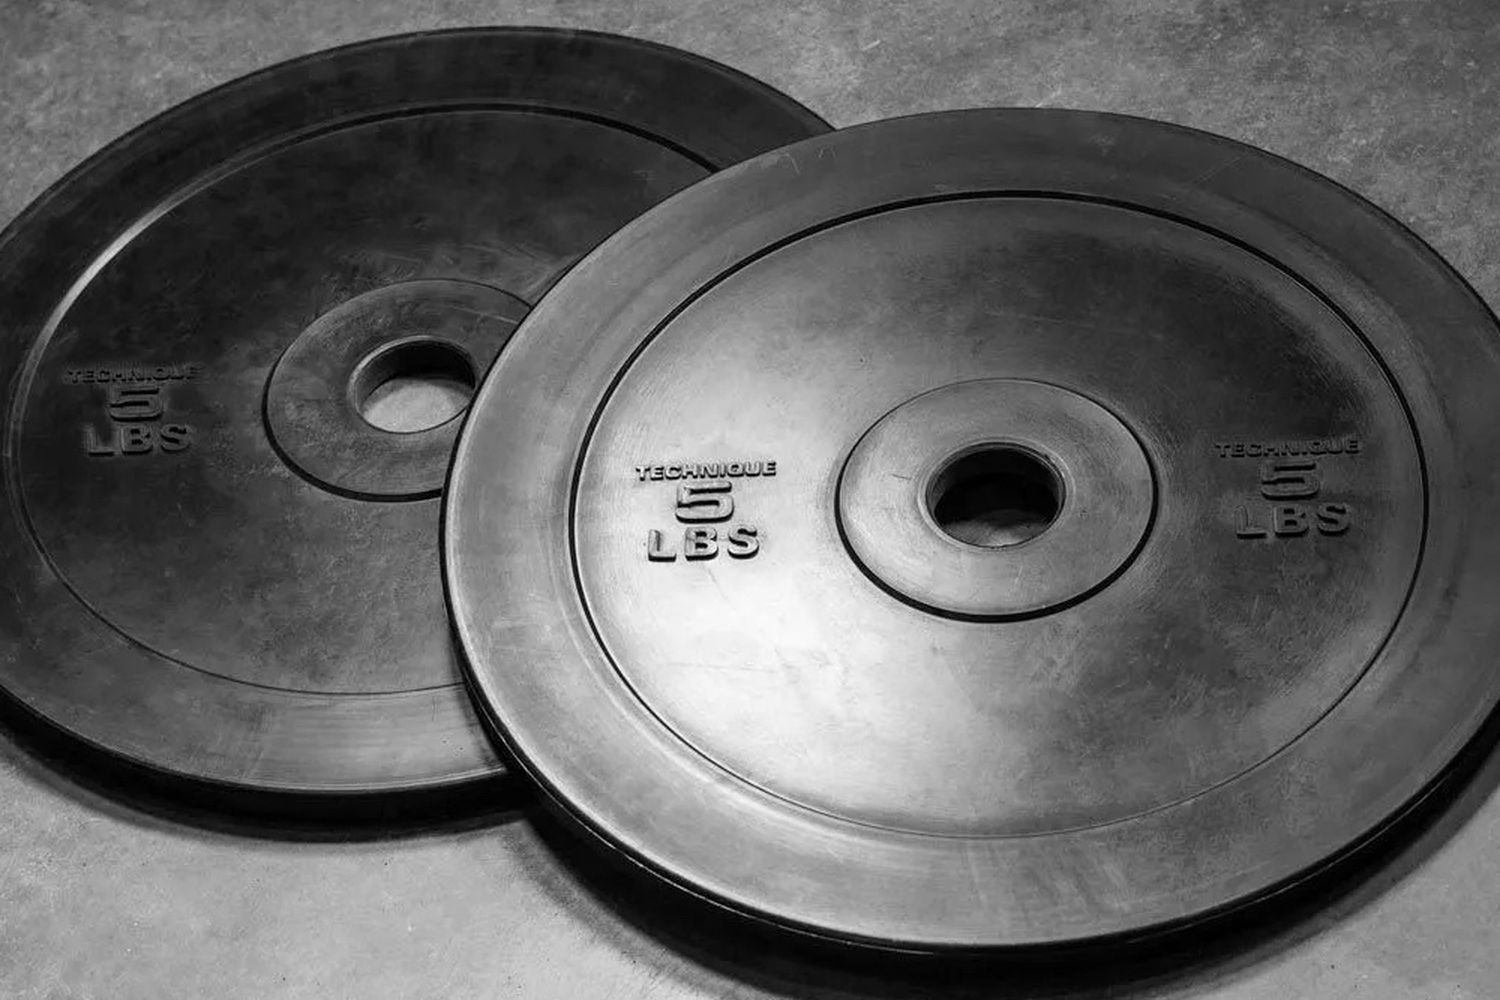 Rep Fitness Extra Firm Technique Bumper Plates 5 Lbs Pair